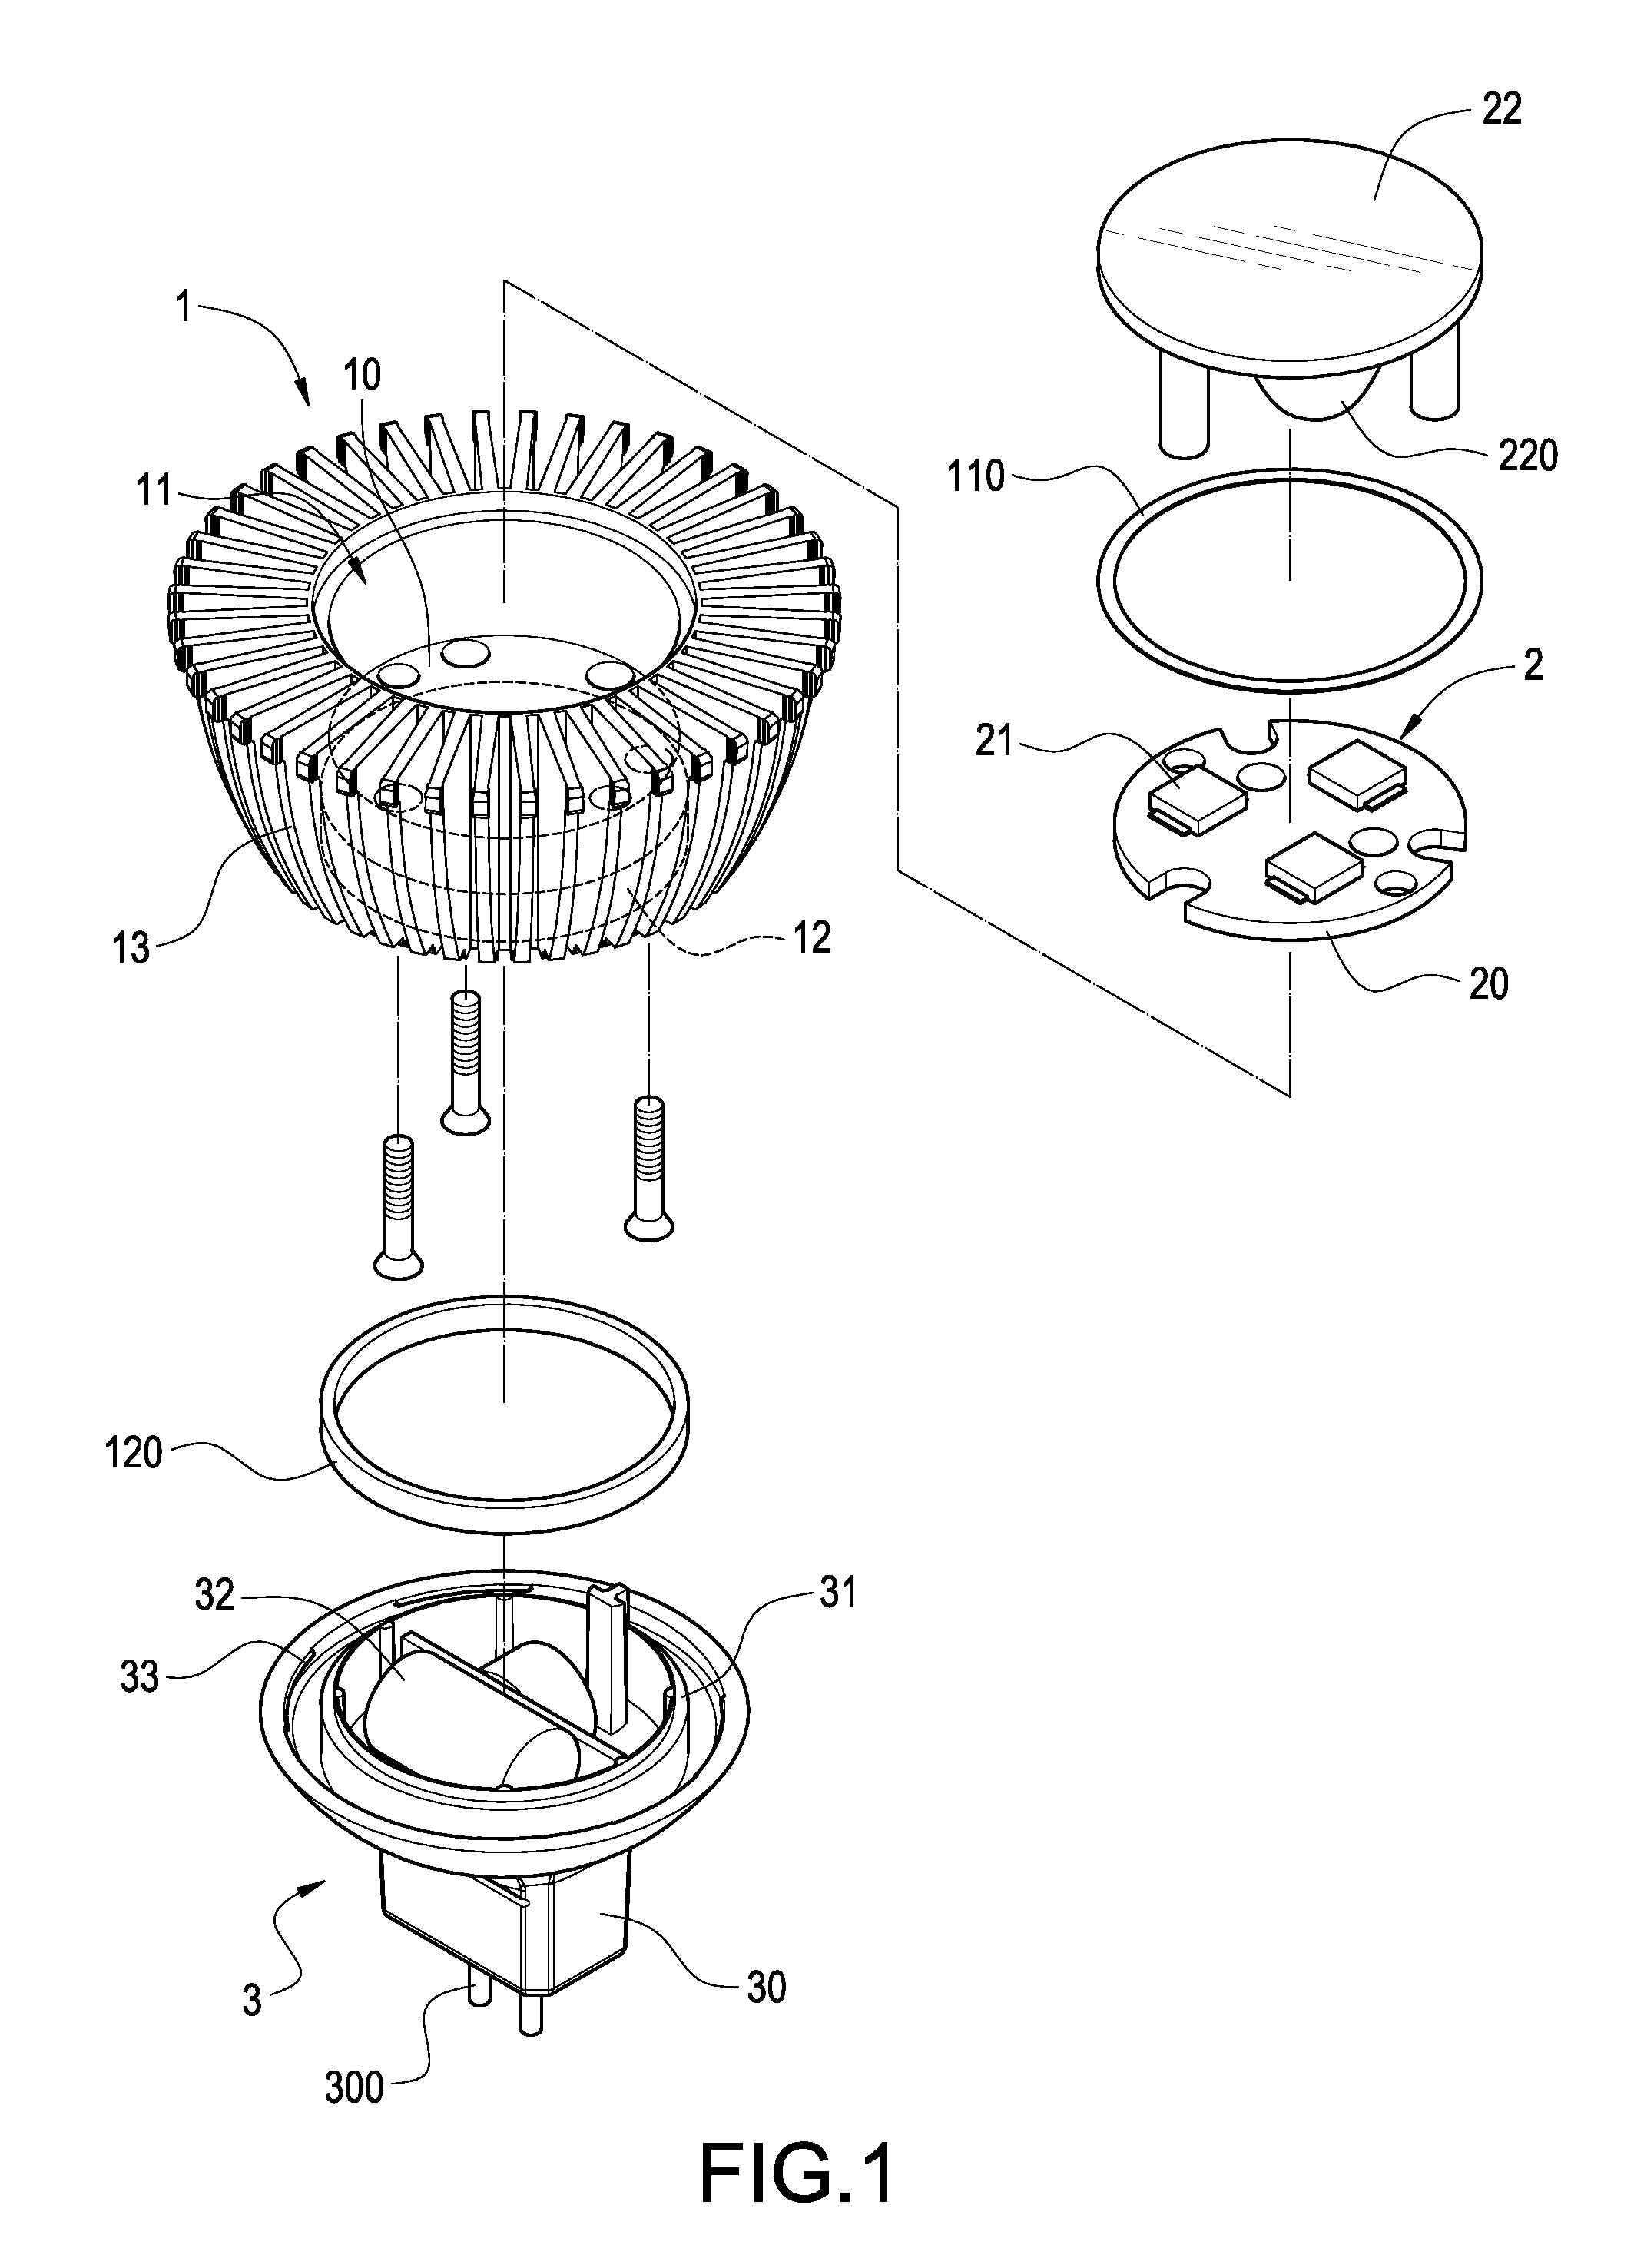 Lamp with double water resistance structure